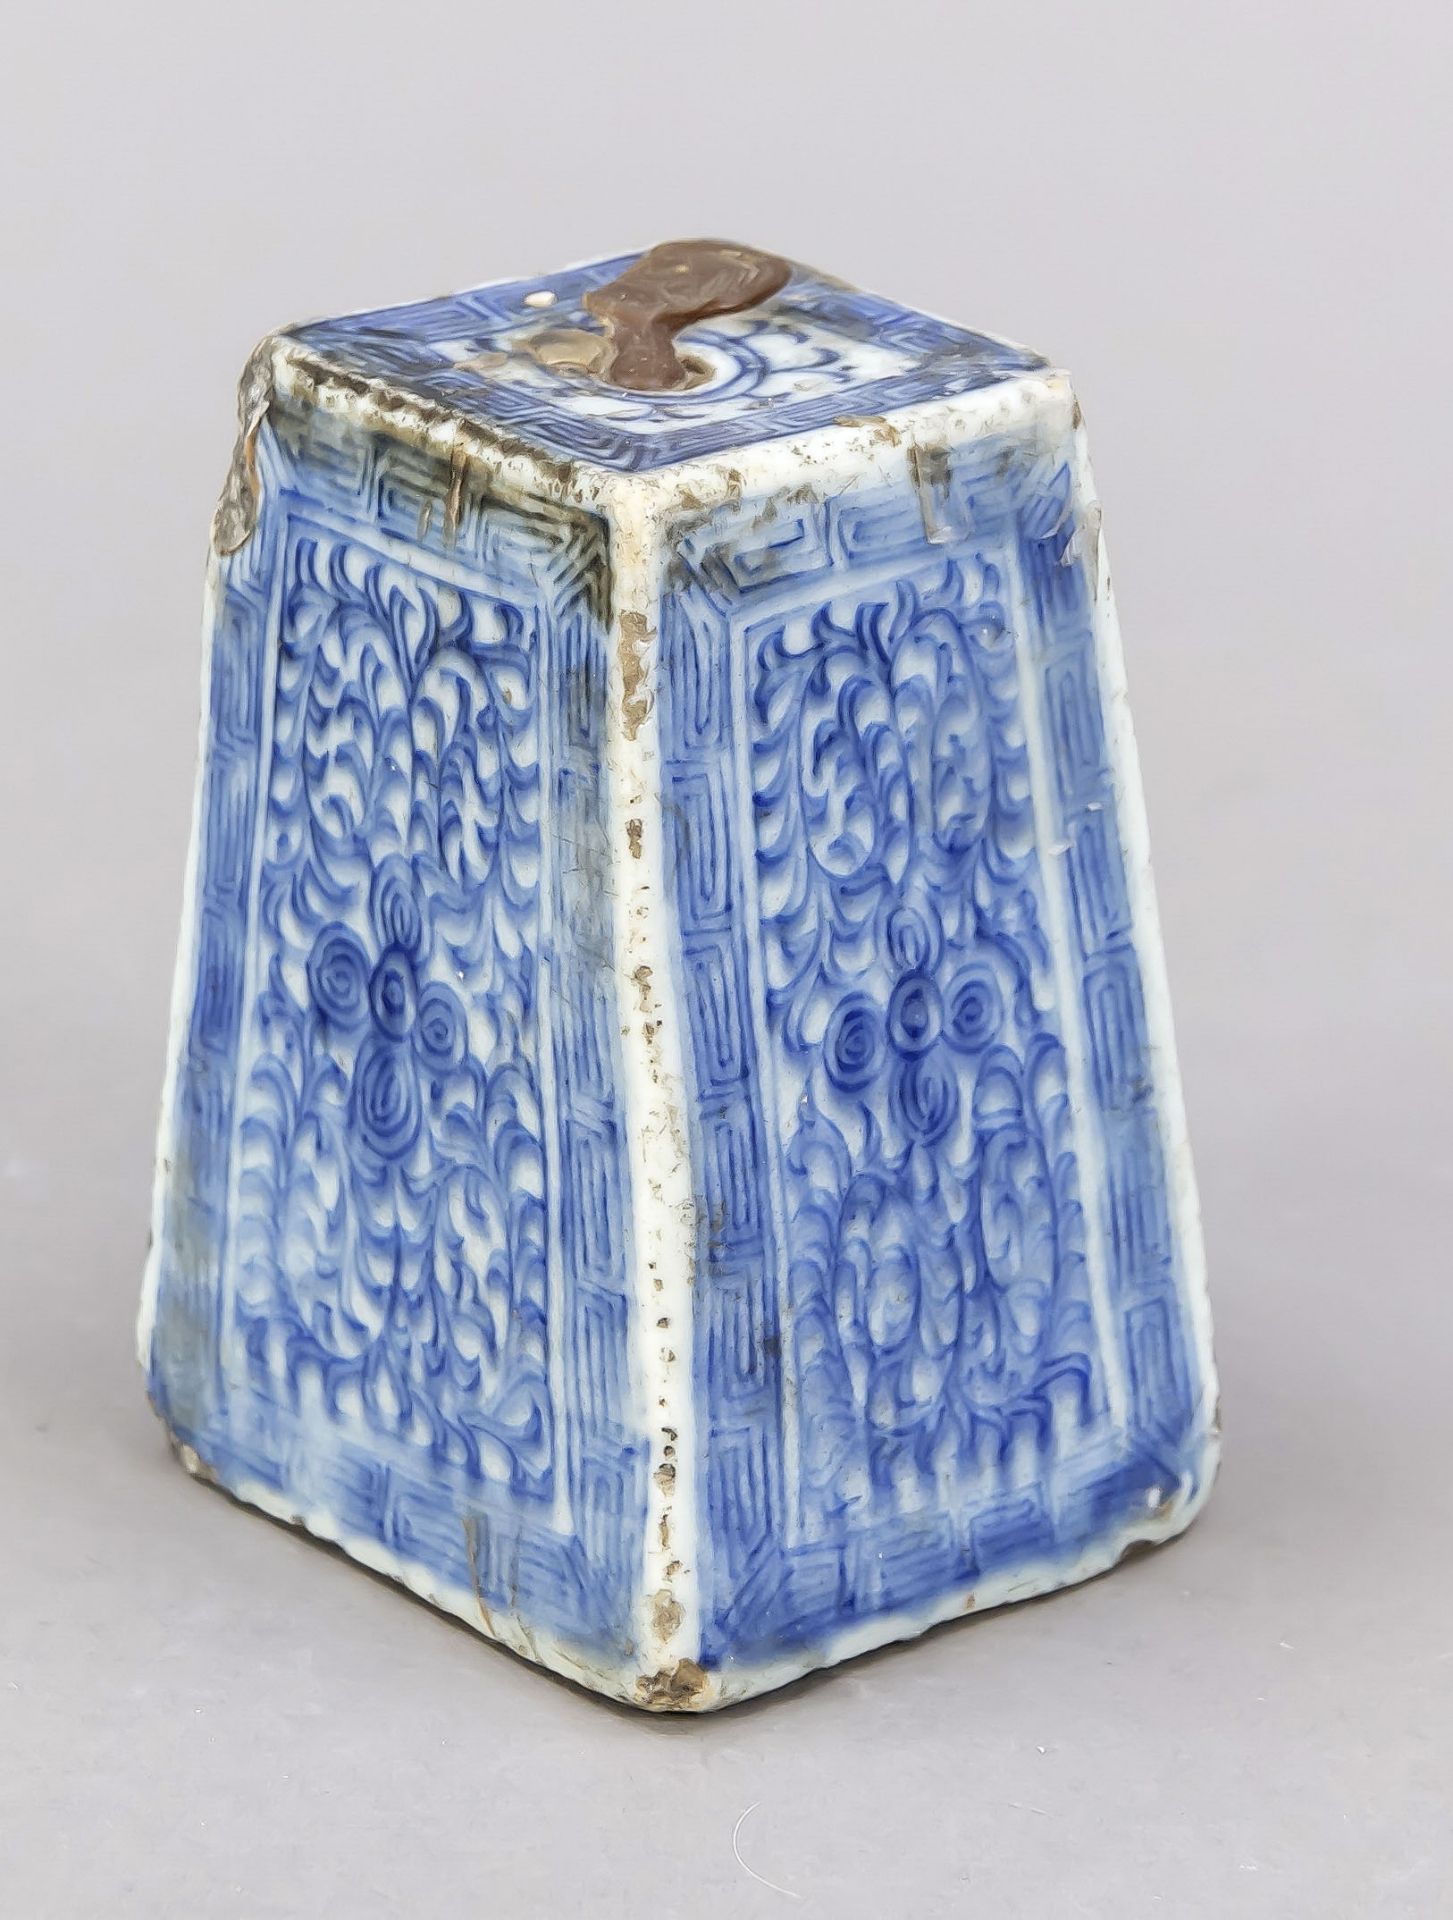 Stamp/seal/base, China, 19th c. (or earlier?).